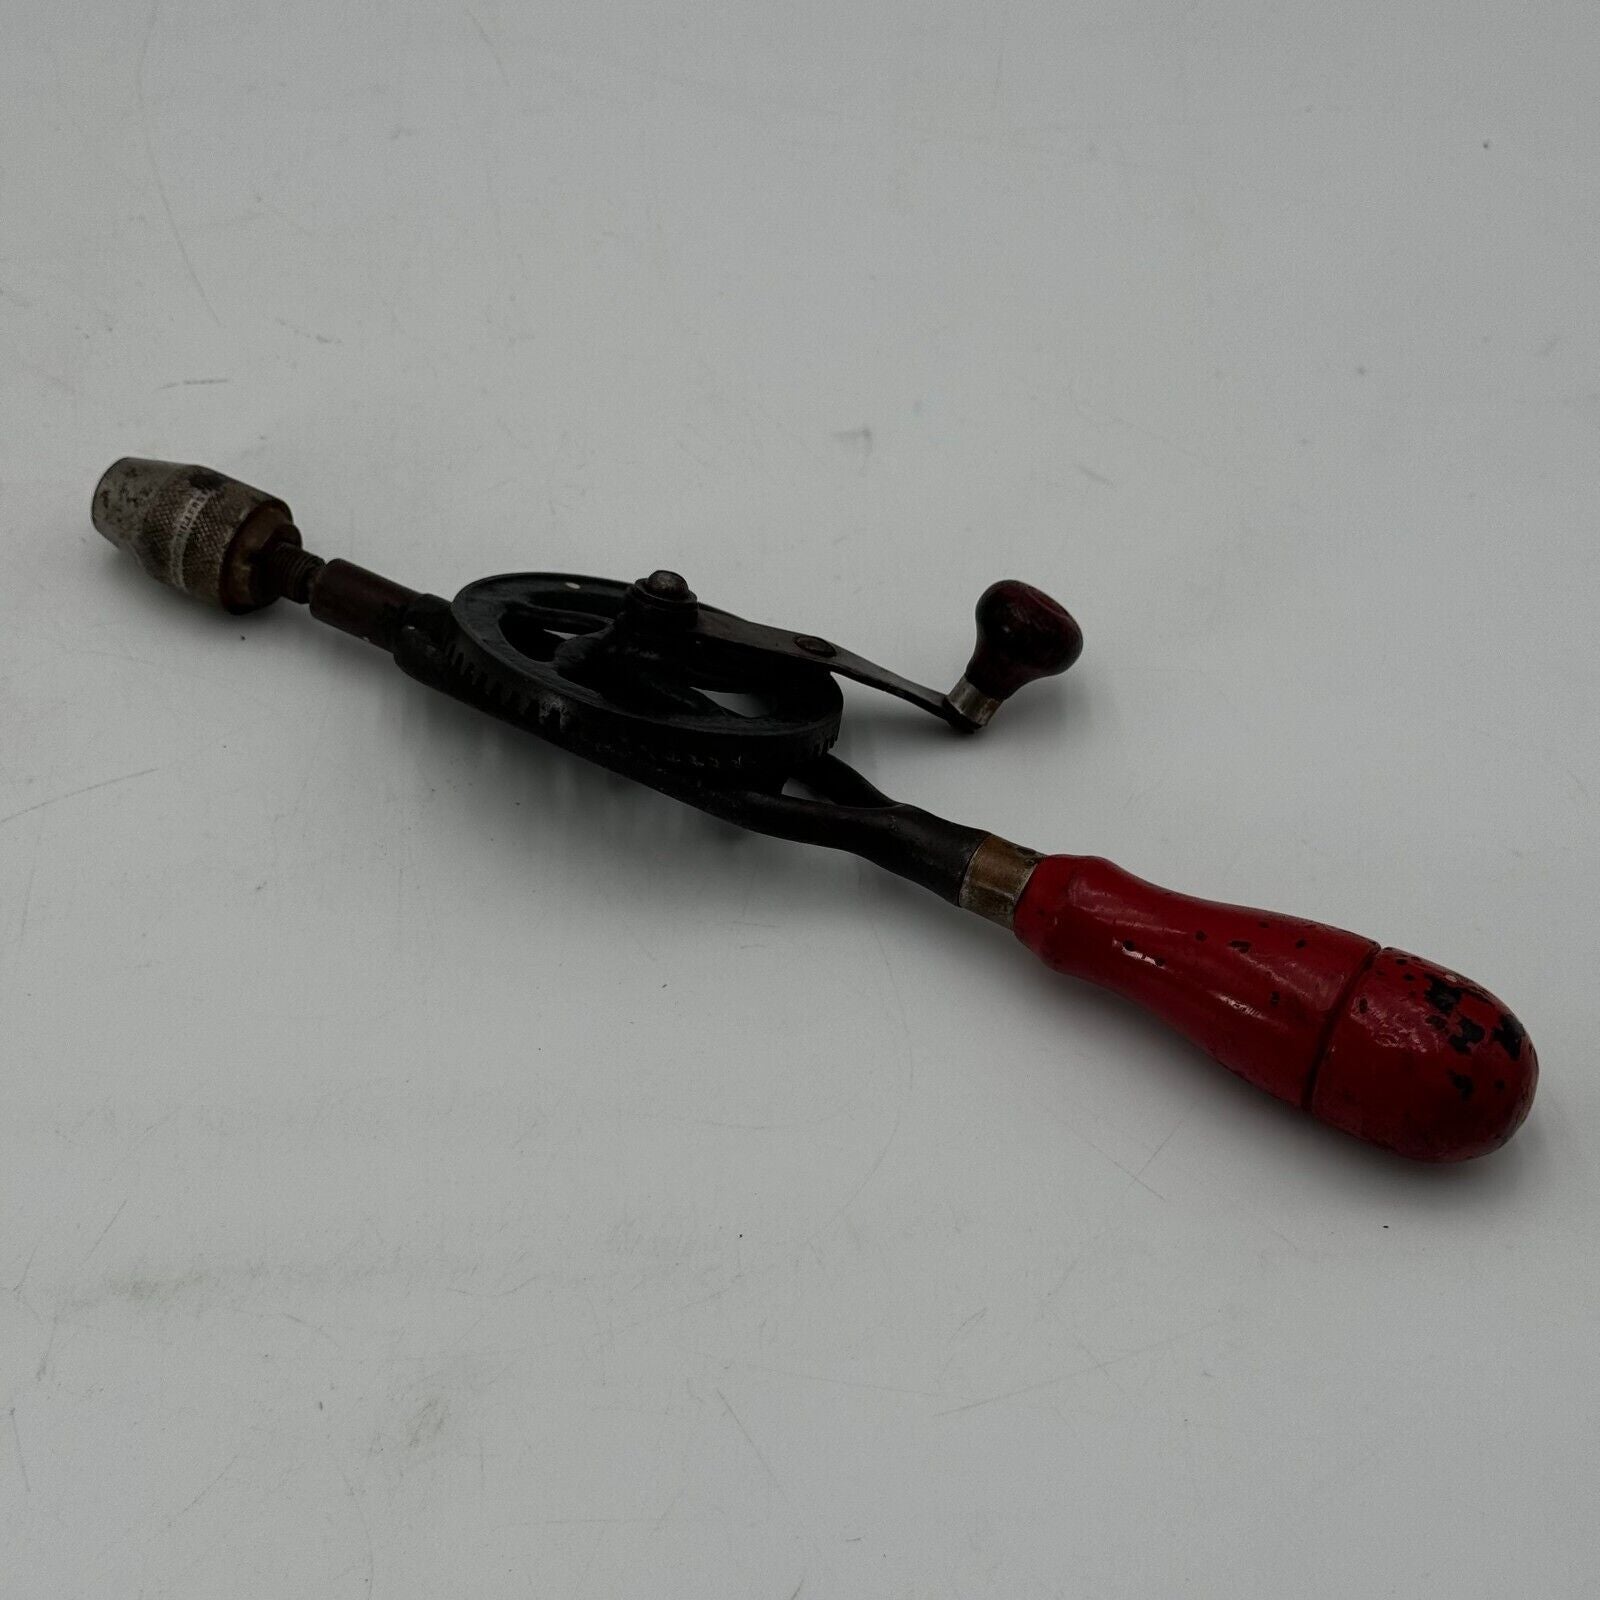 Vintage Millers Falls No 1 Drill Eggbeater Hand Drill Wood Handles 1/4" Drive